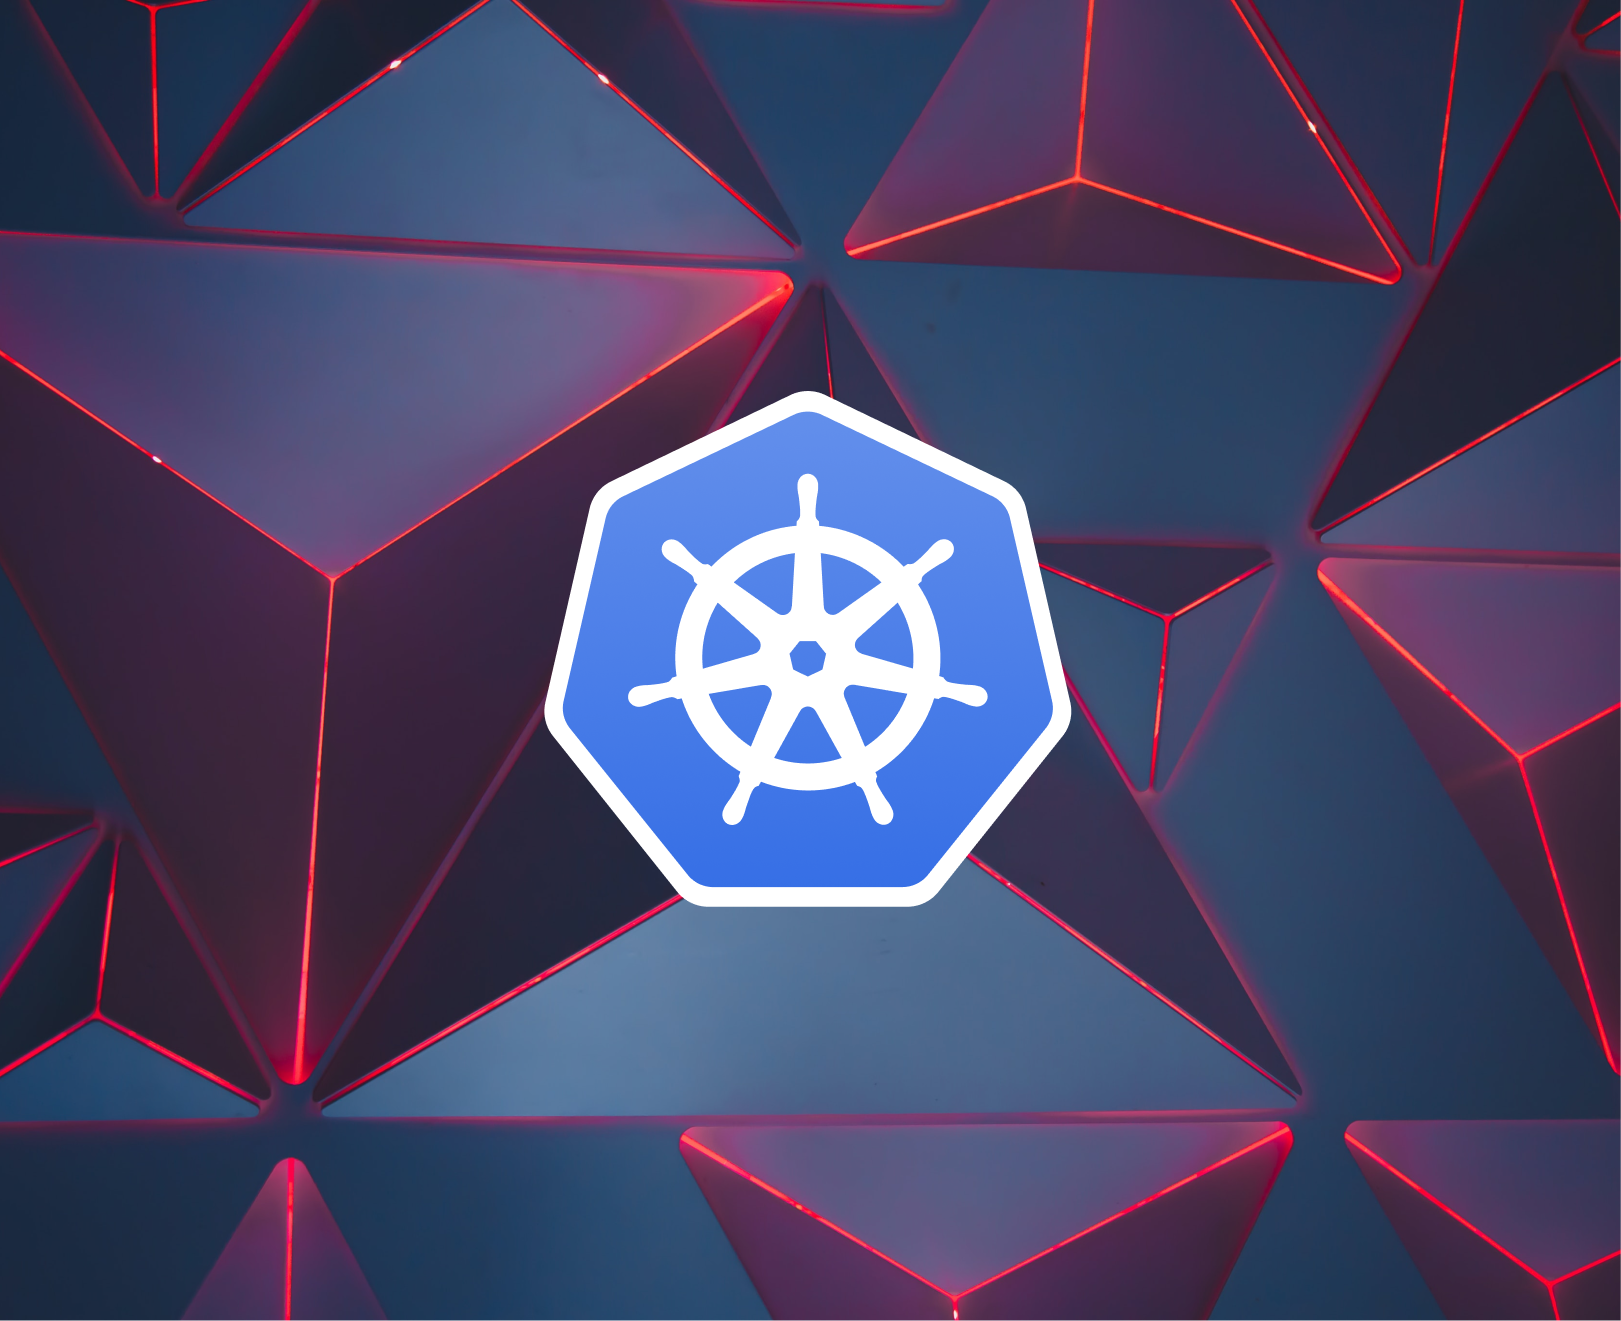 Understanding Kubernetes Ingress resources and controllers